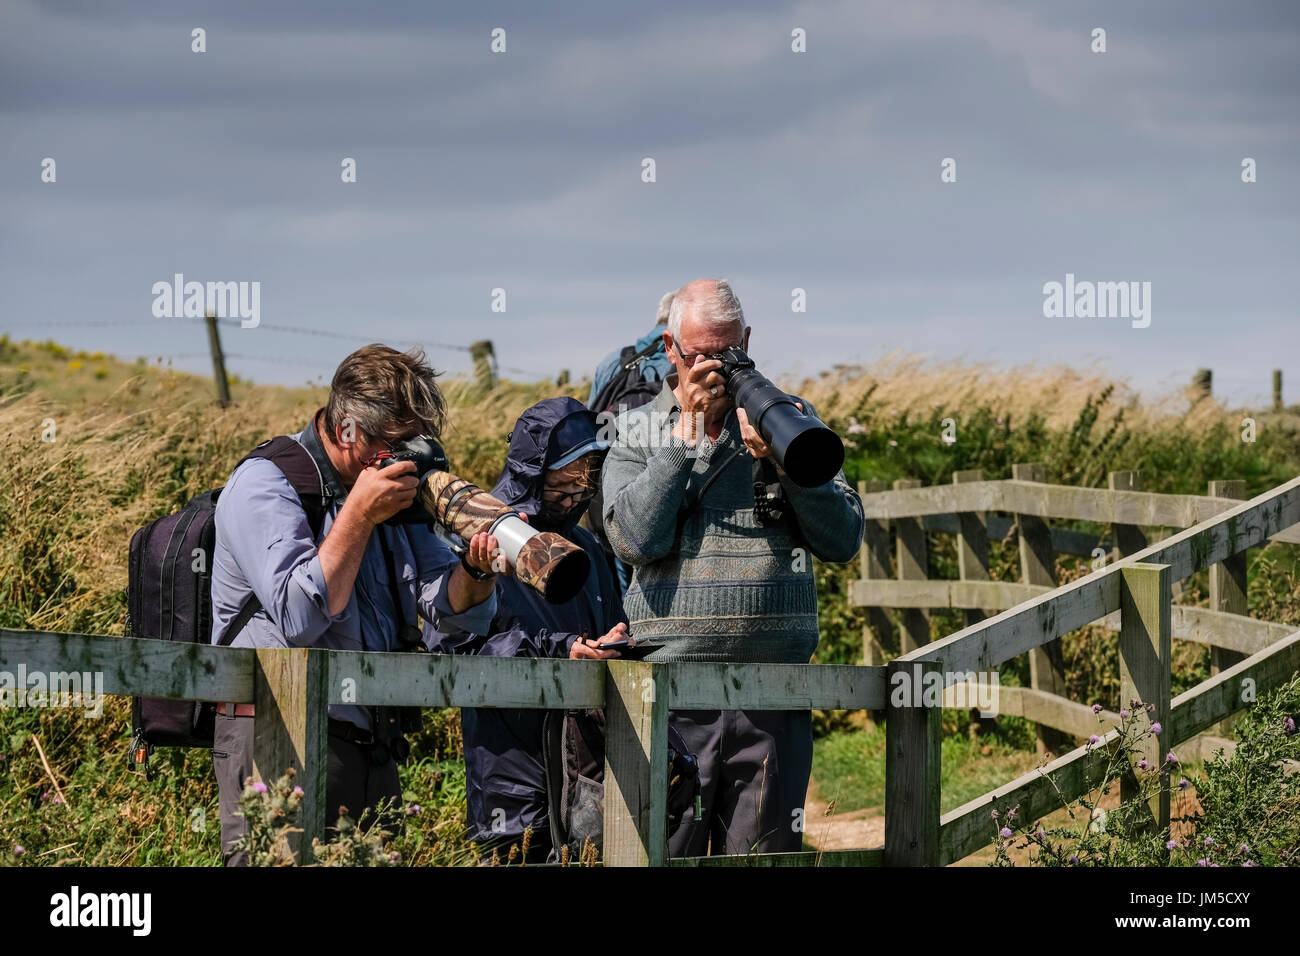 Two men with cameras using long lenses, bird watching bird watchers at a viewpoint on Bempton Cliffs RSPB Reserve, UK. A women is on her cellphone mob. Stock Photo